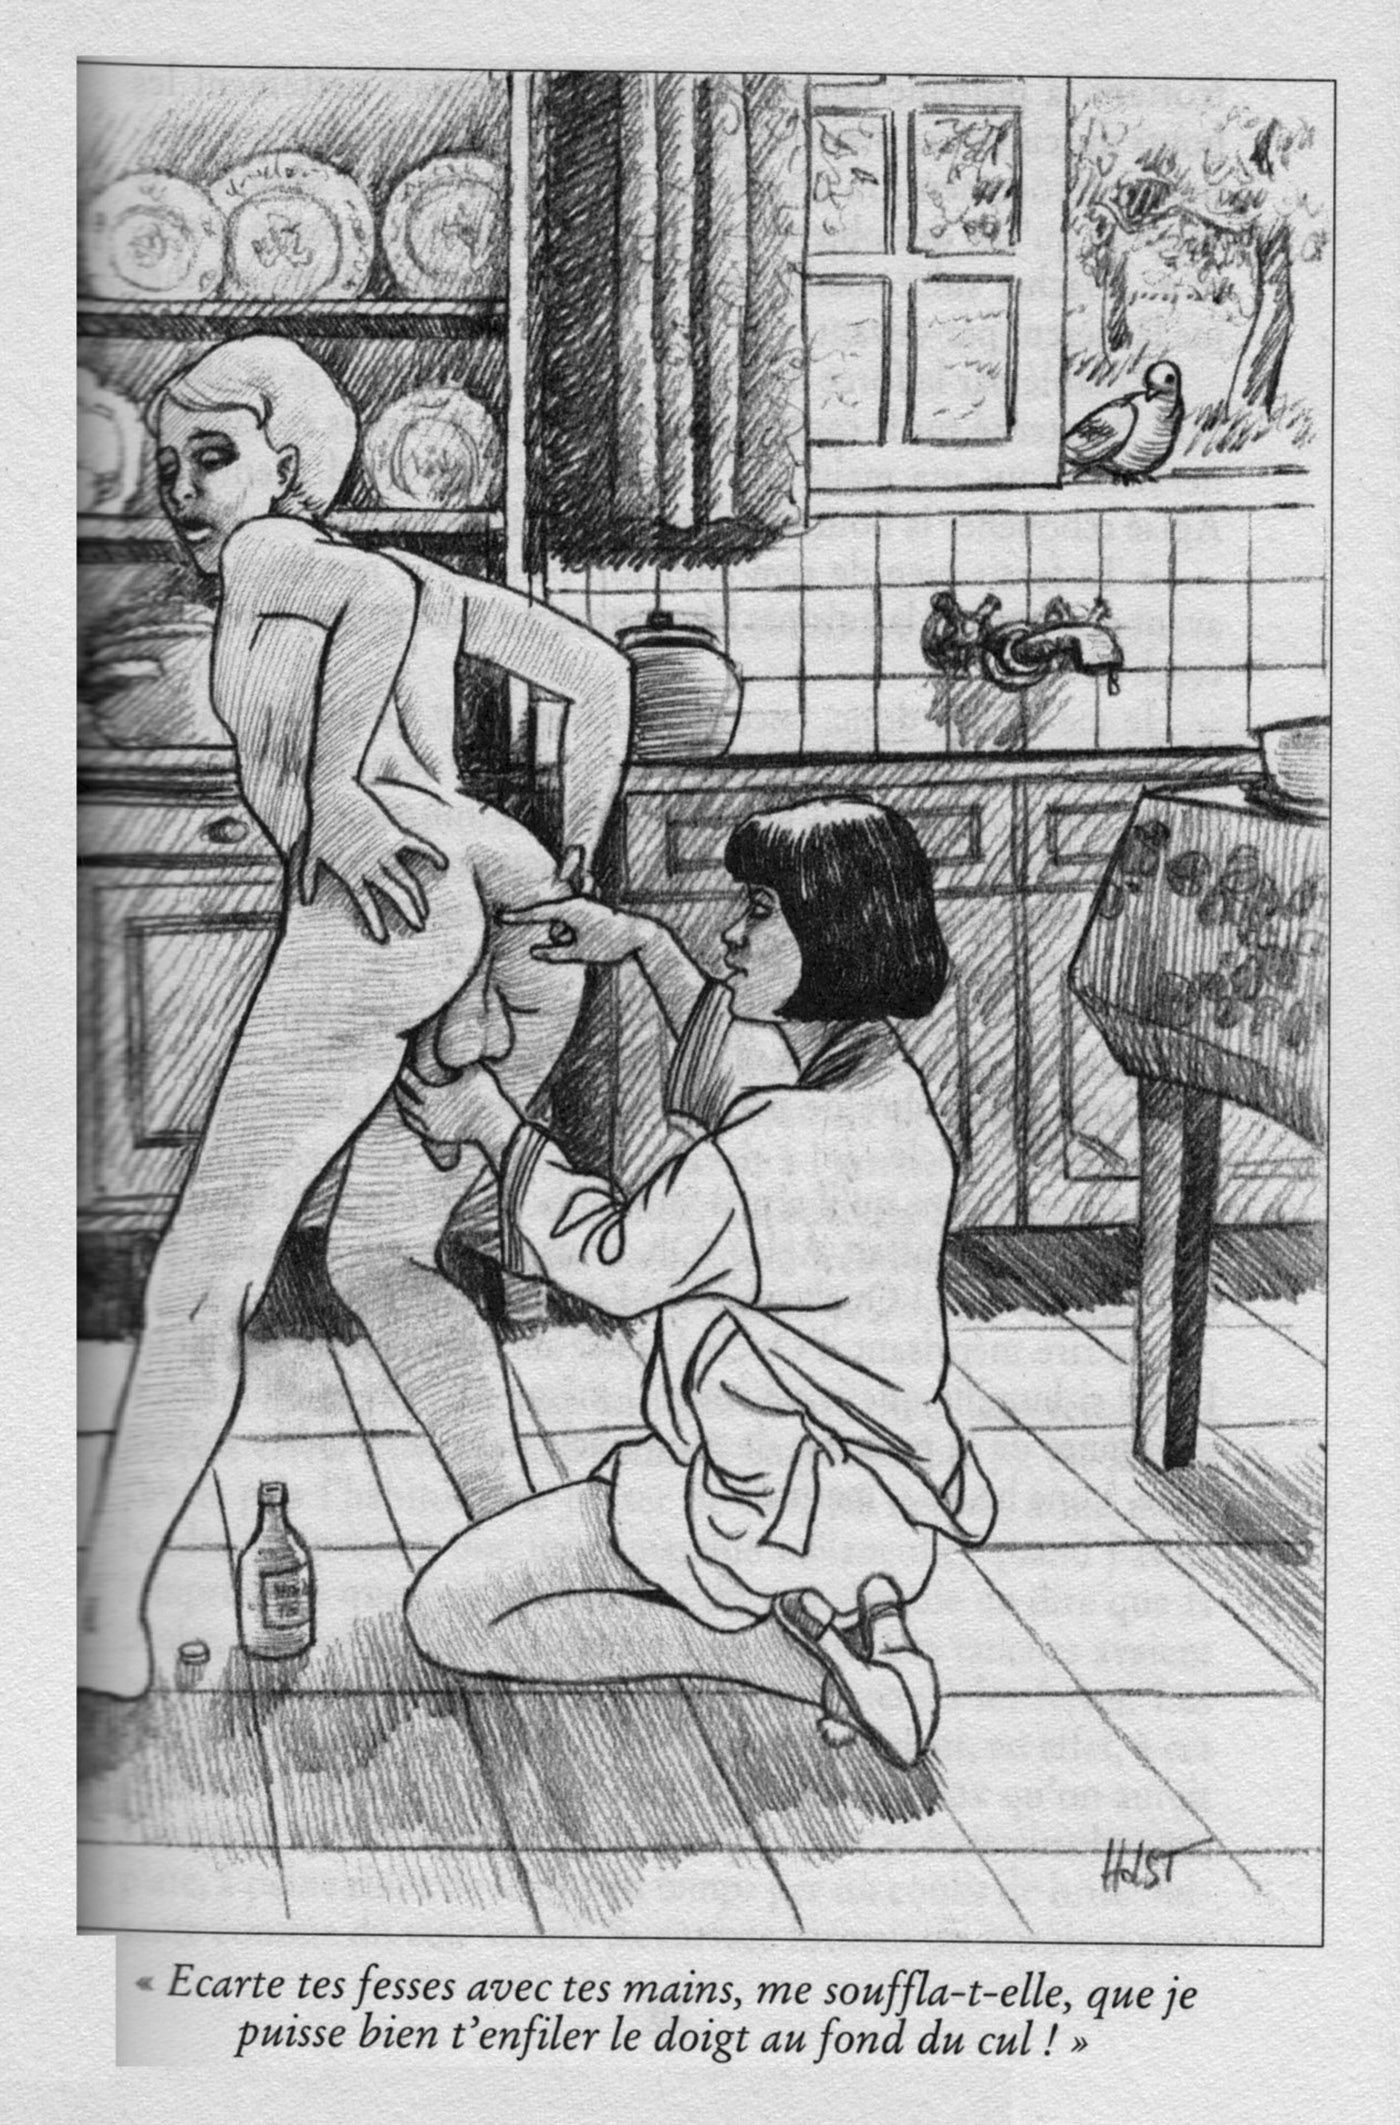 Tranny Fucking Guy Drawing - Femdom family drawing story - Photos and other amusements.